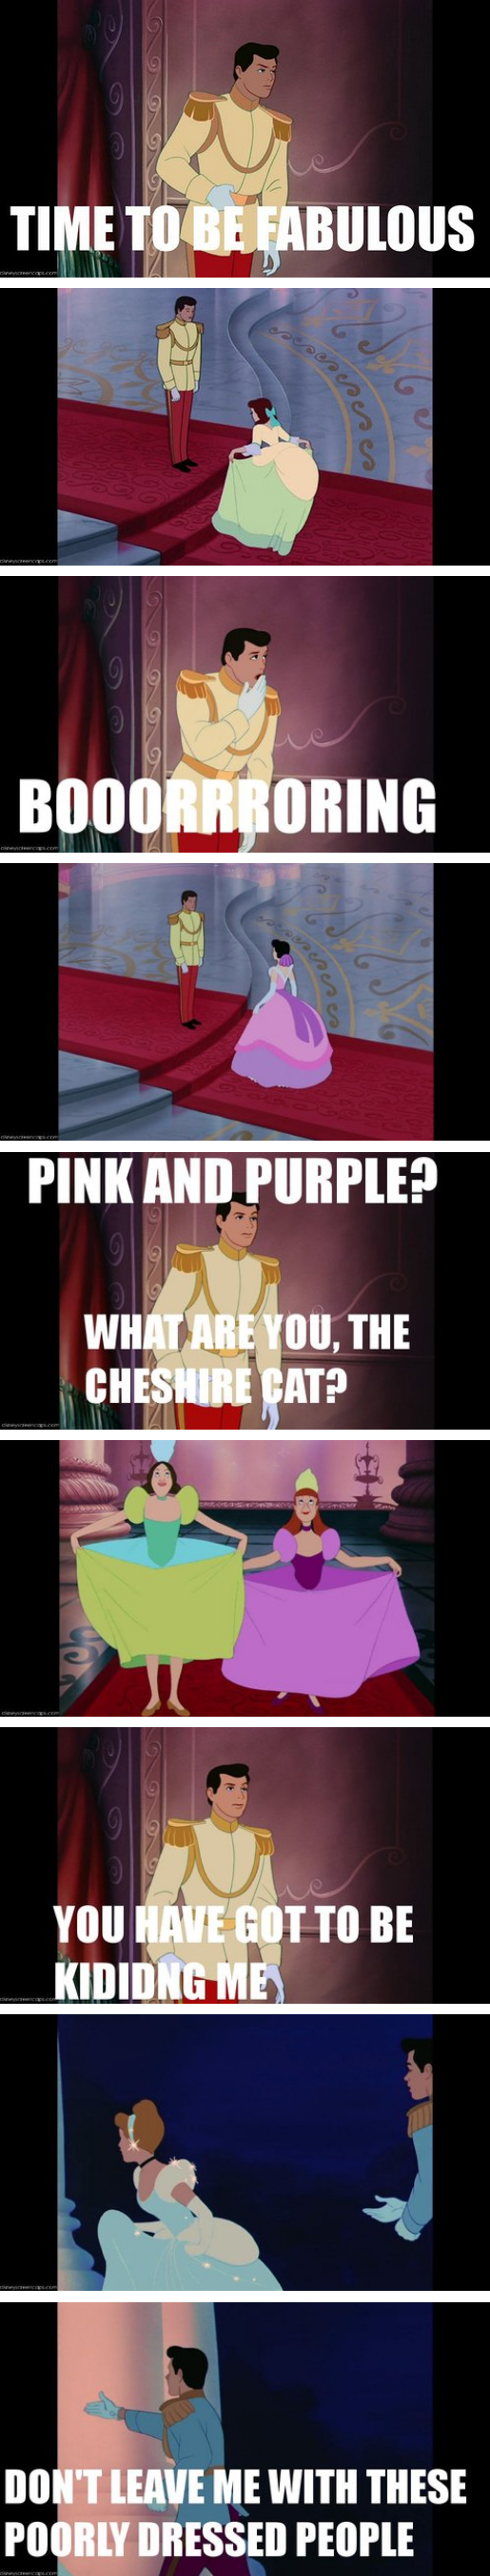 Cinderella is actually the story of one man on a mission to find a fashionably dressed woman.